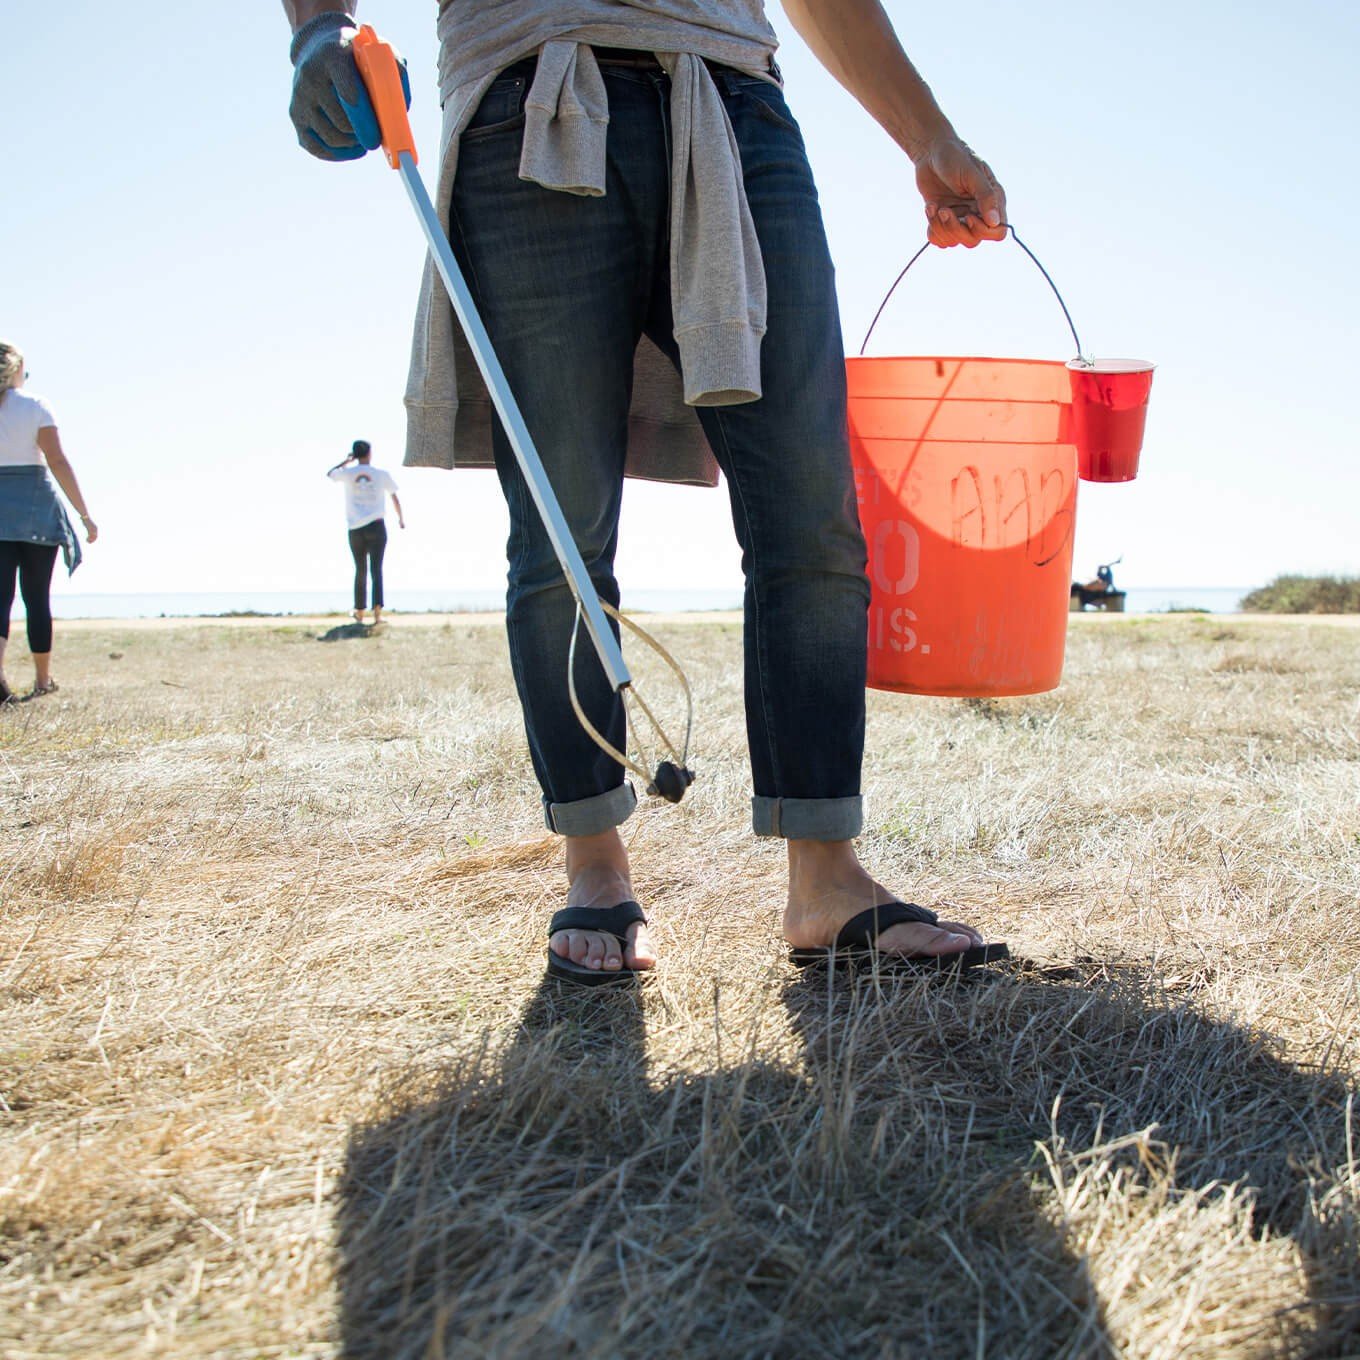 Volunteer with grabber tool and bucket picks up trash during a beach cleanup.